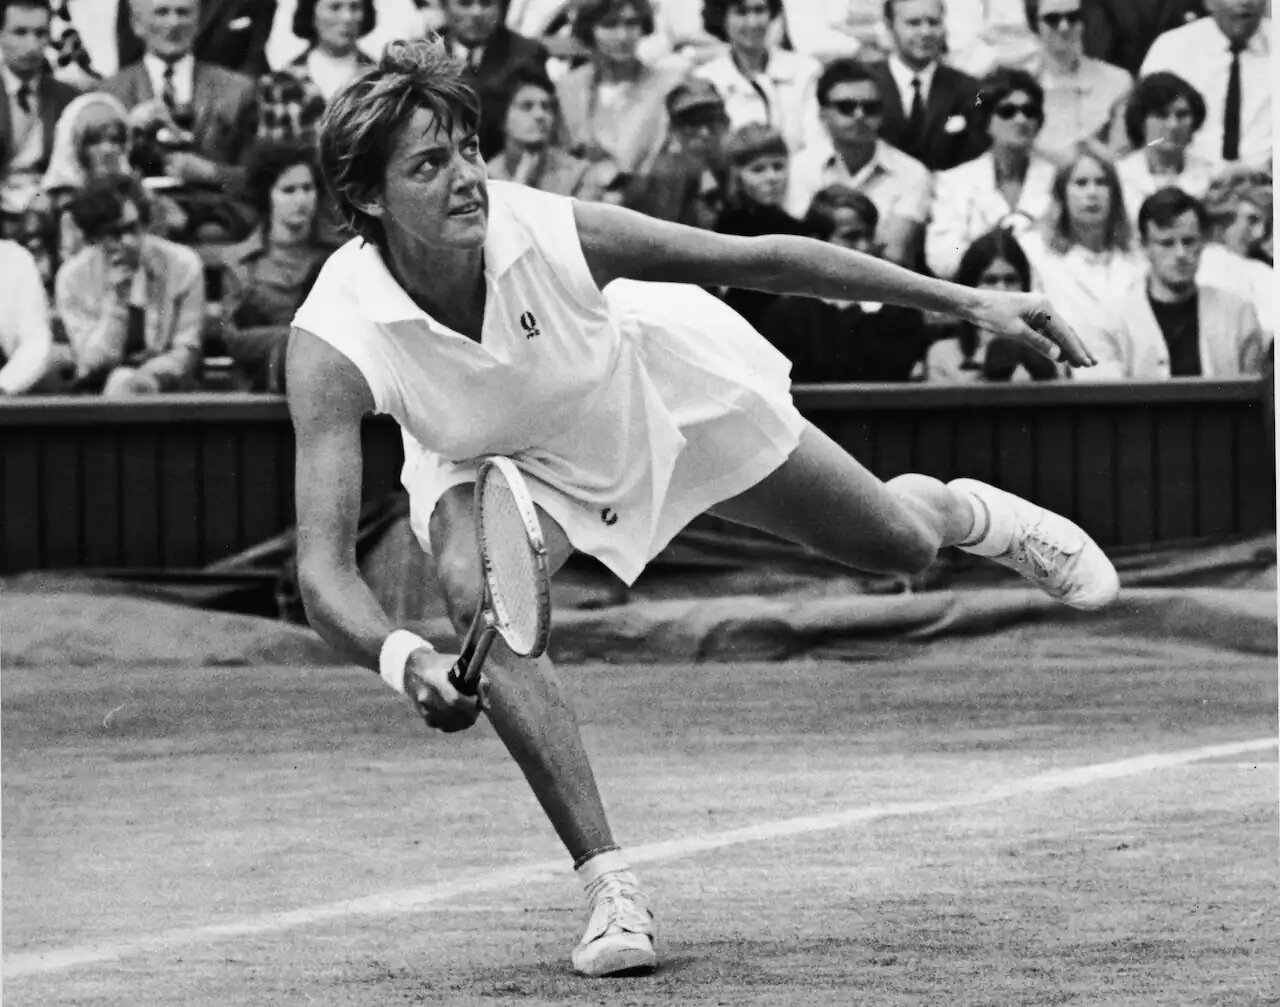 Australia's Margaret Court in action at the Wimbledon semi-finals in 1970, the year she captured the calendar Grand Slam.